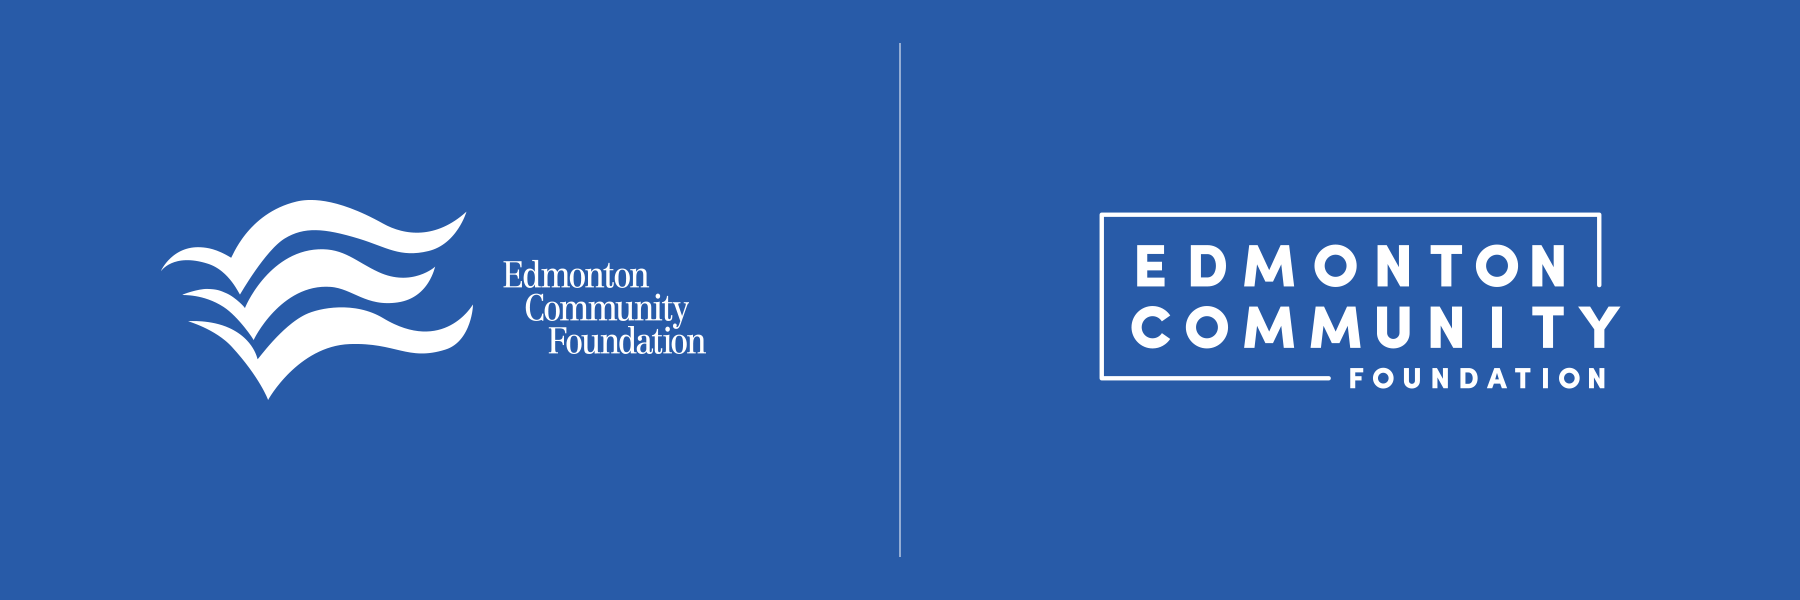 edmonton community foundation logo redesign before and after image